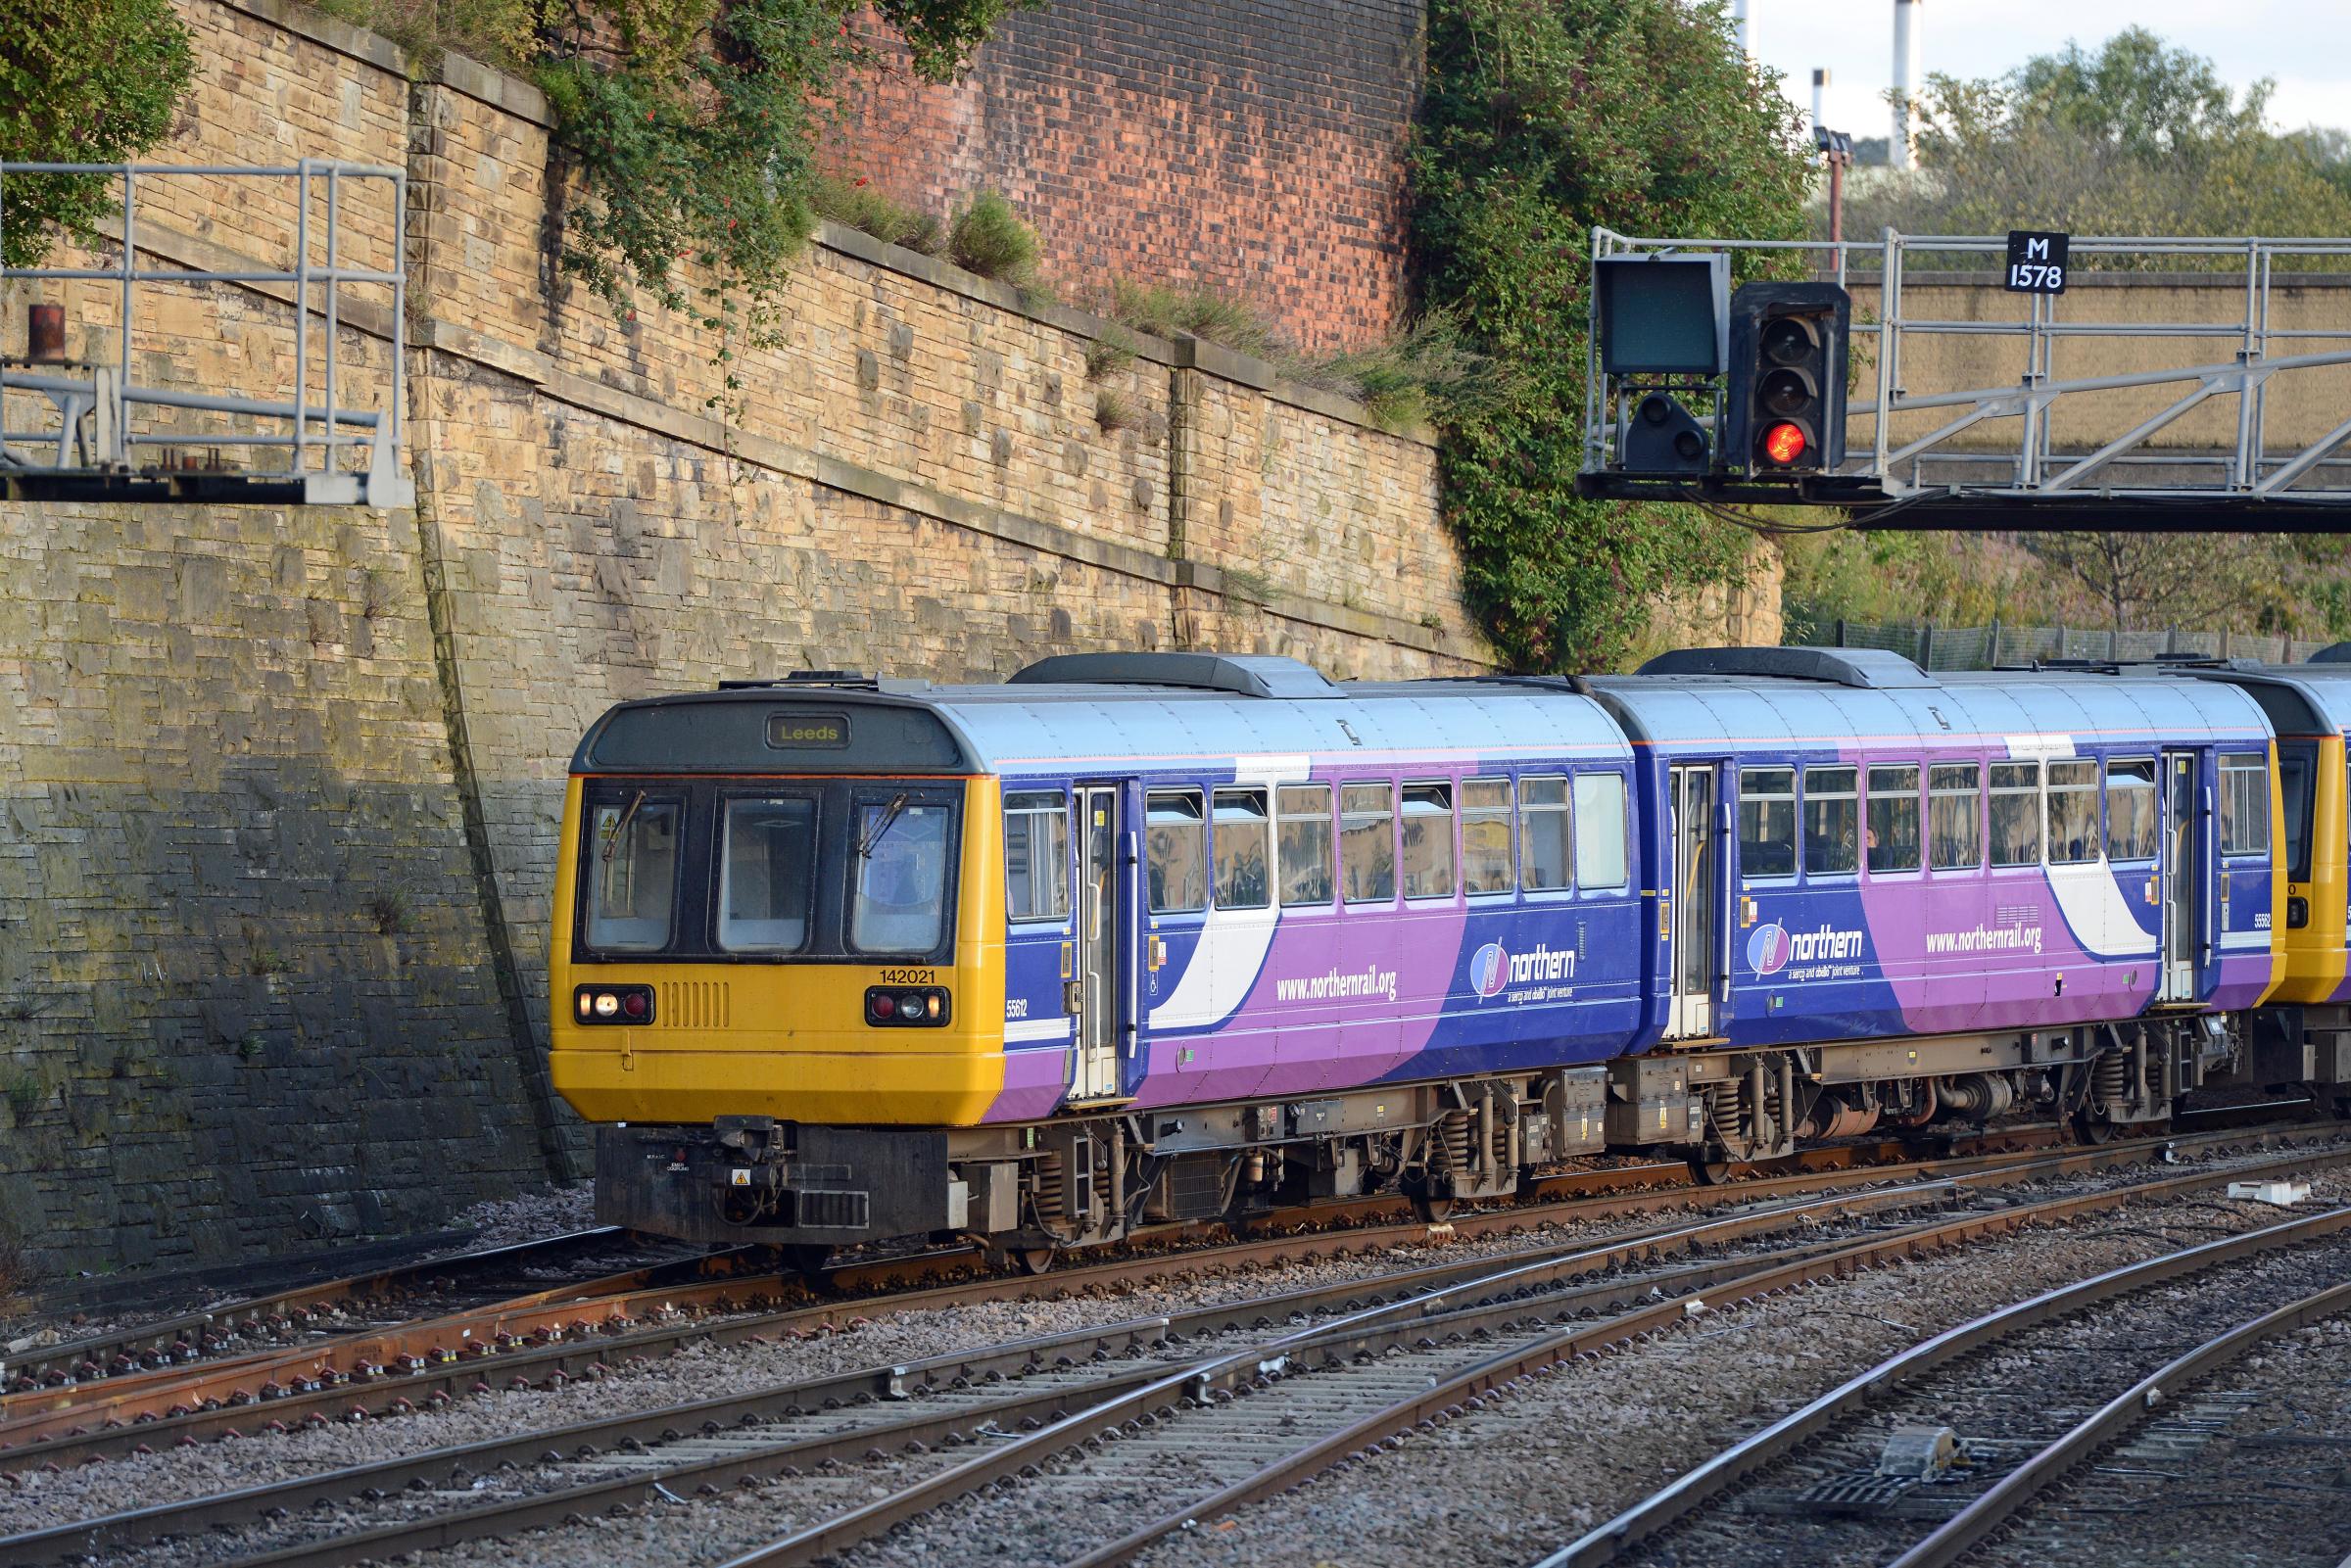 Bradford Council leader grills rail company over when hated 'Pacer' trains will be replaced